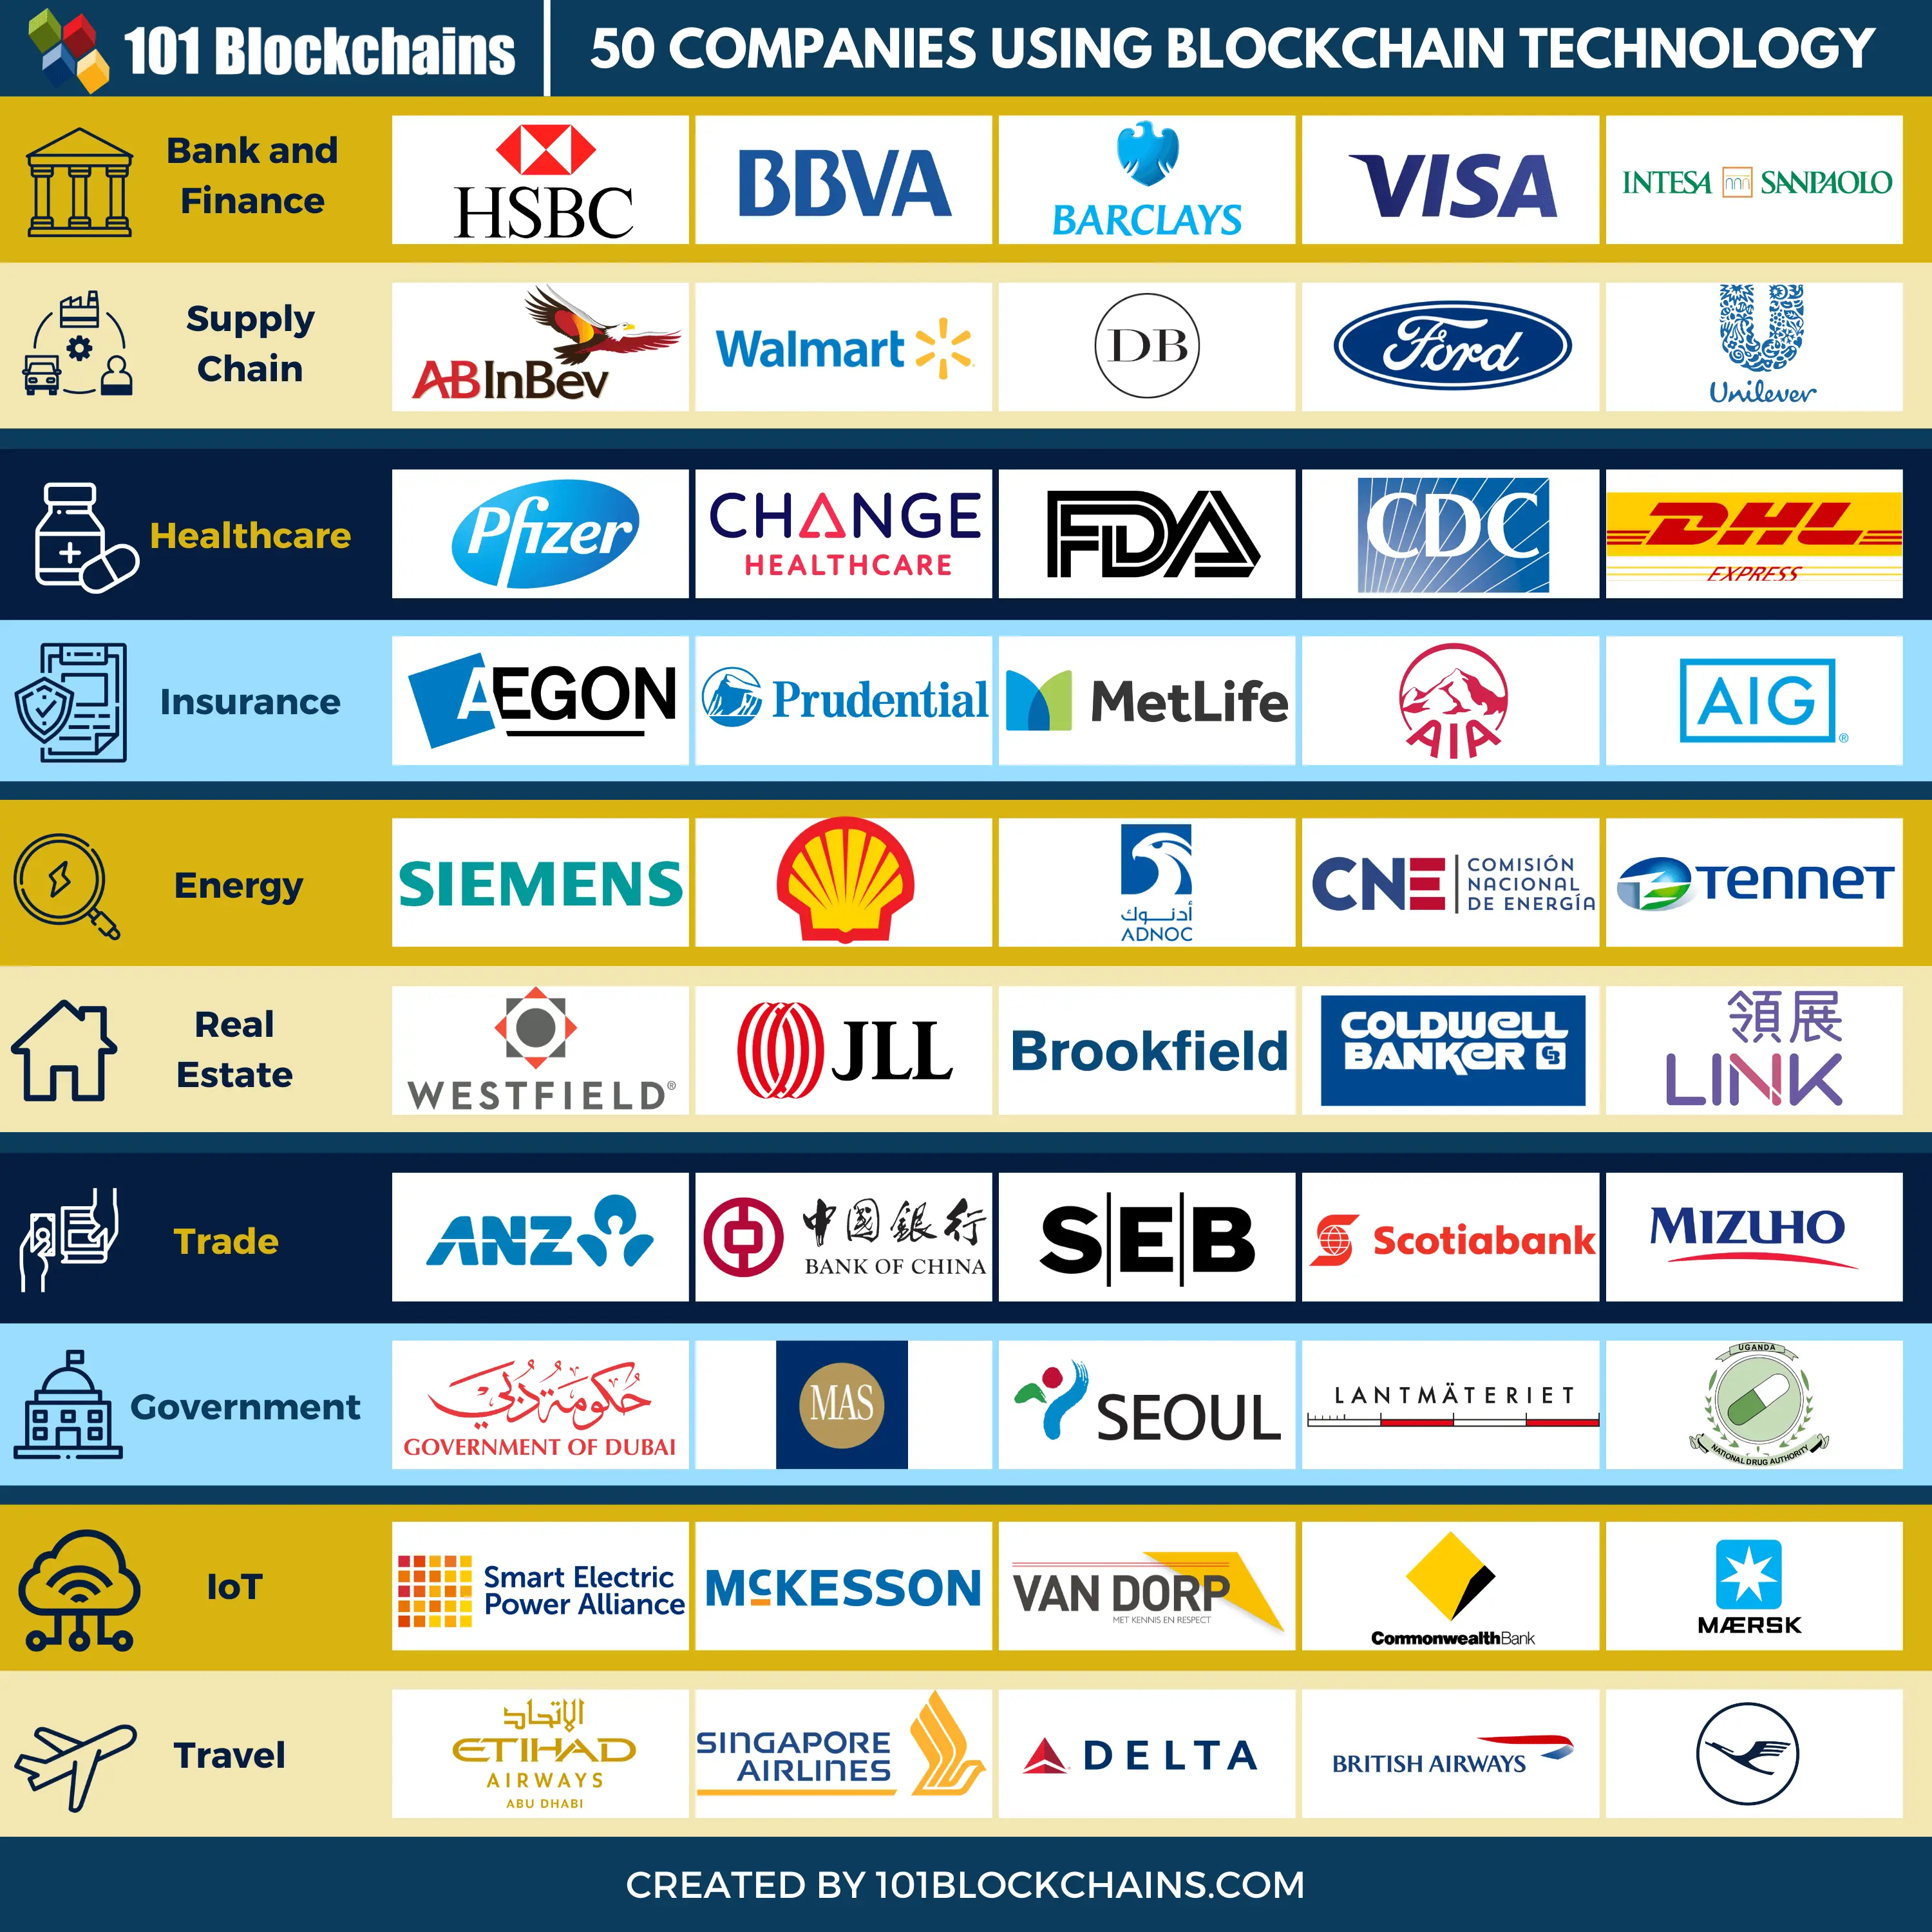 15 Major Companies That Accept Bitcoin as Payment